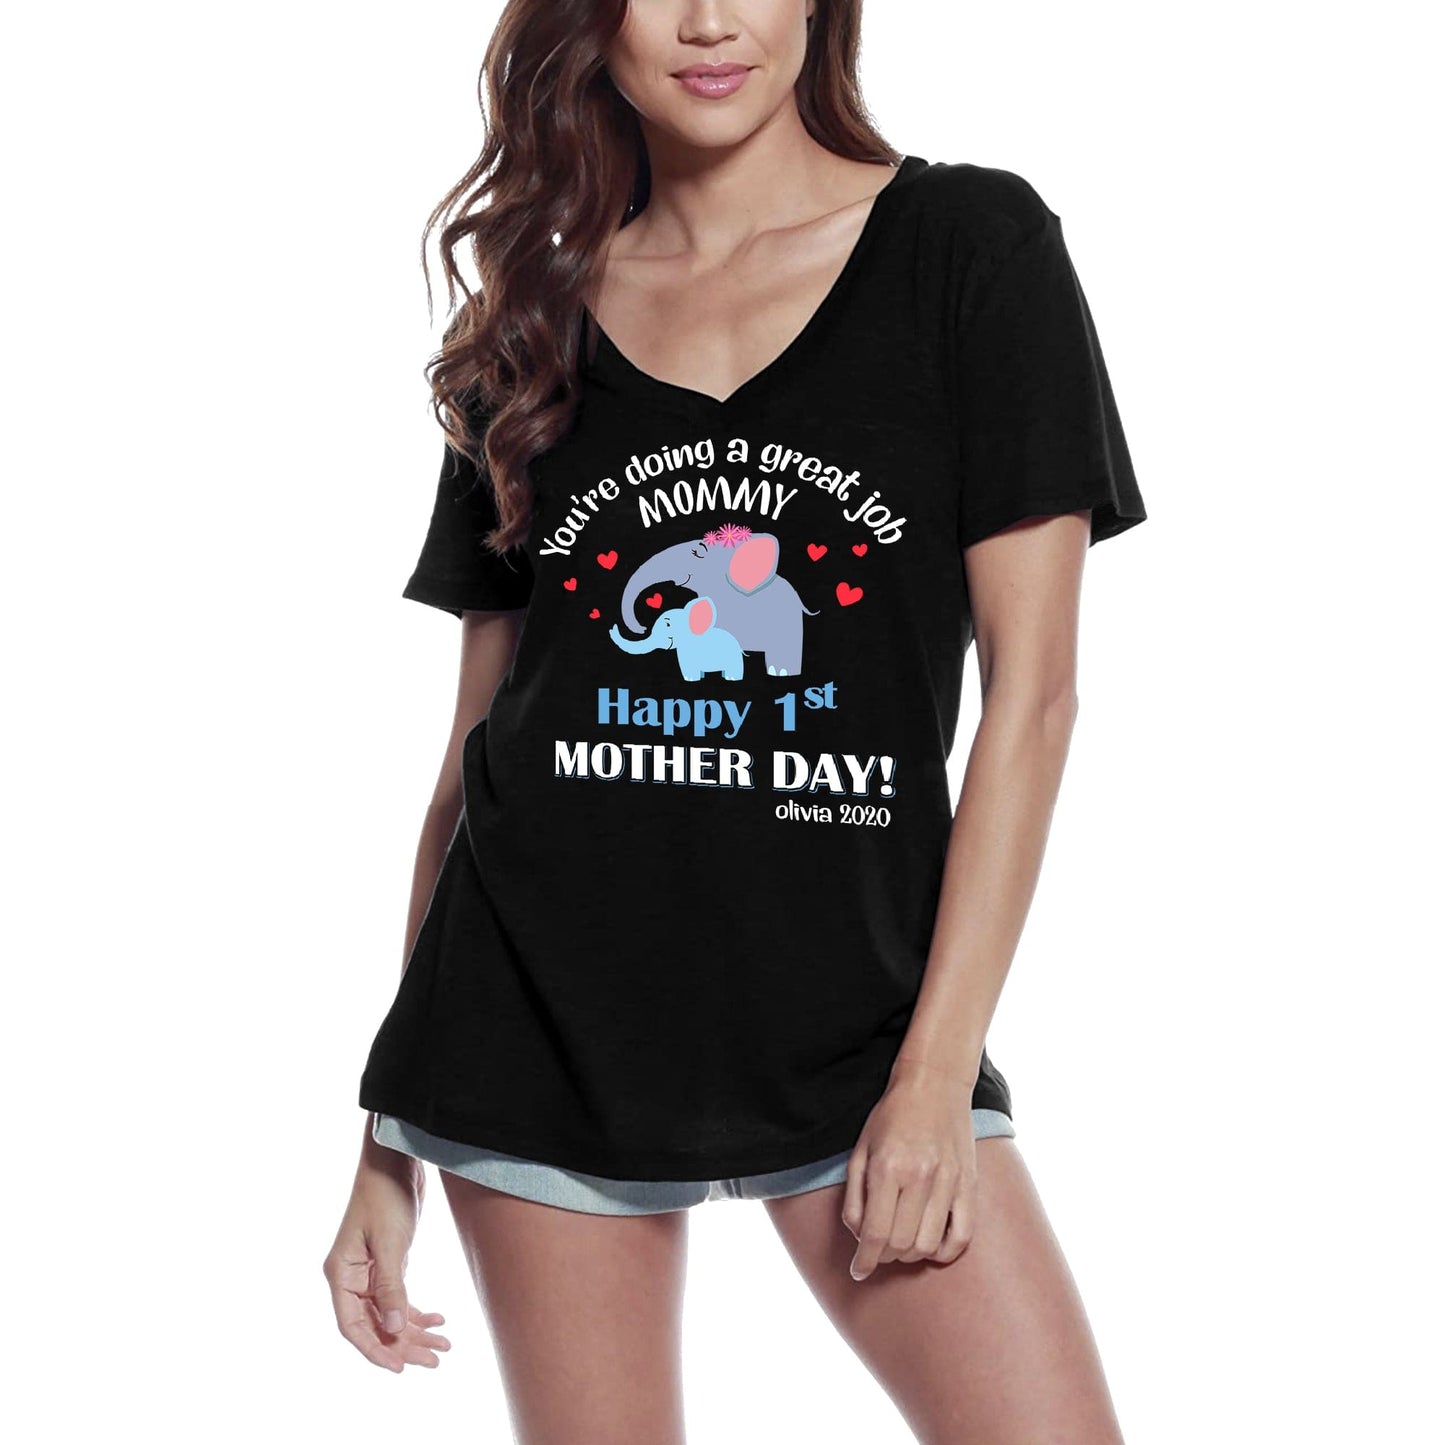 ULTRABASIC Women's T-Shirt You're Doing Great Job Mommy - Happy Mother's Day Tee Shirt